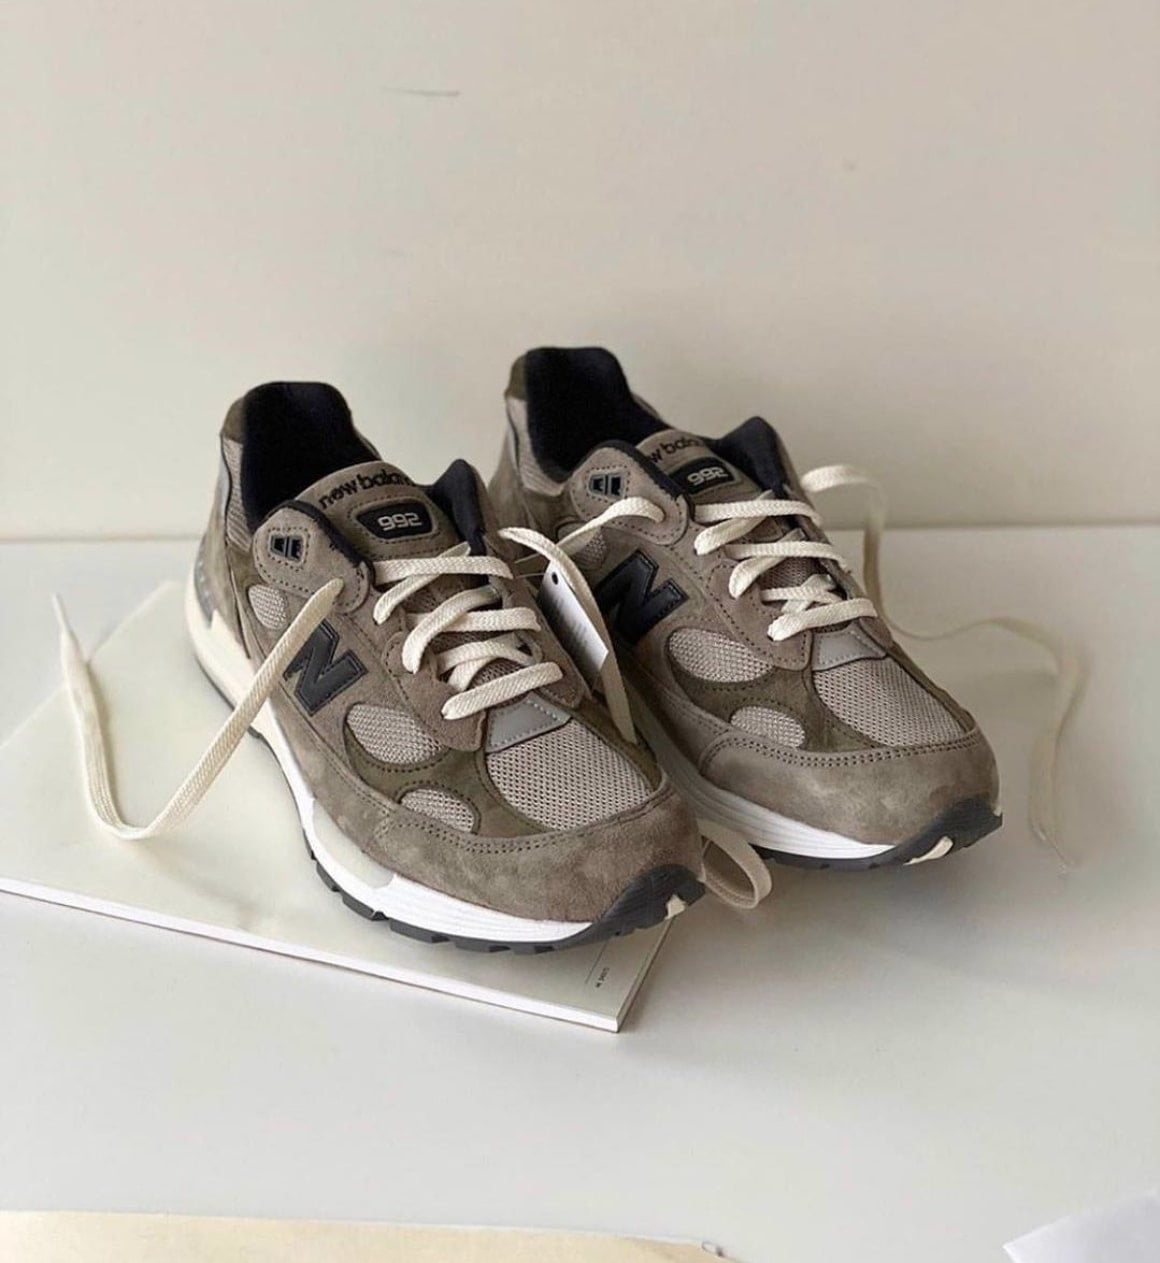 Here's Your First Look at the JJJJound x New Balance 992 - KLEKT Blog